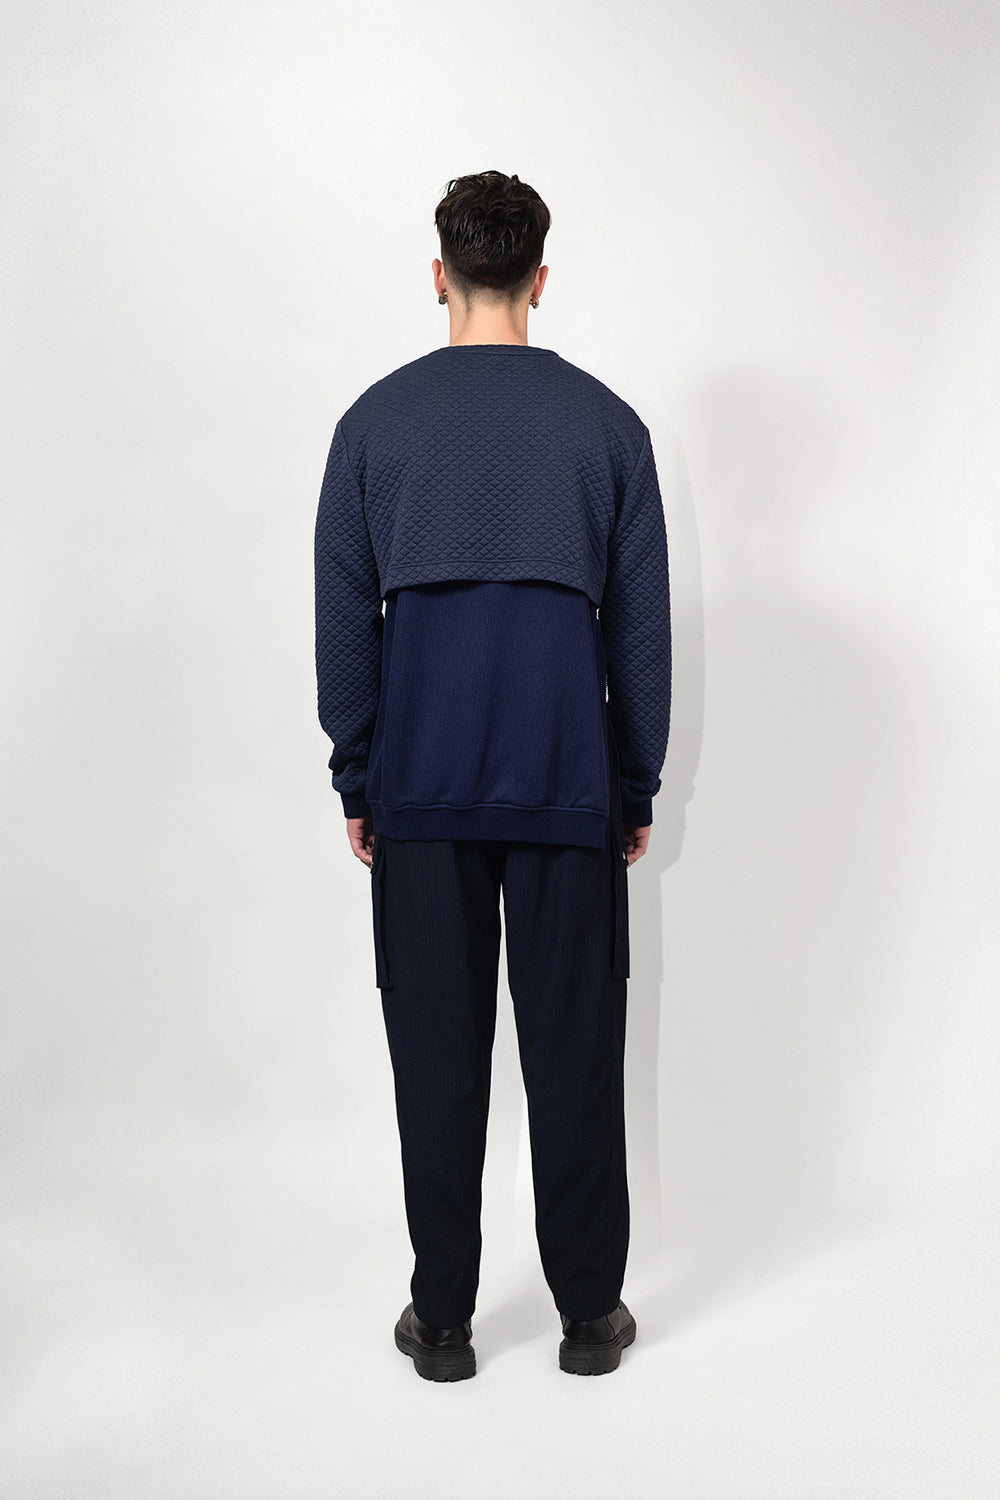 SEANNUNG - MEN - Double-Layer Cutting Top 雙層剪裁大學T